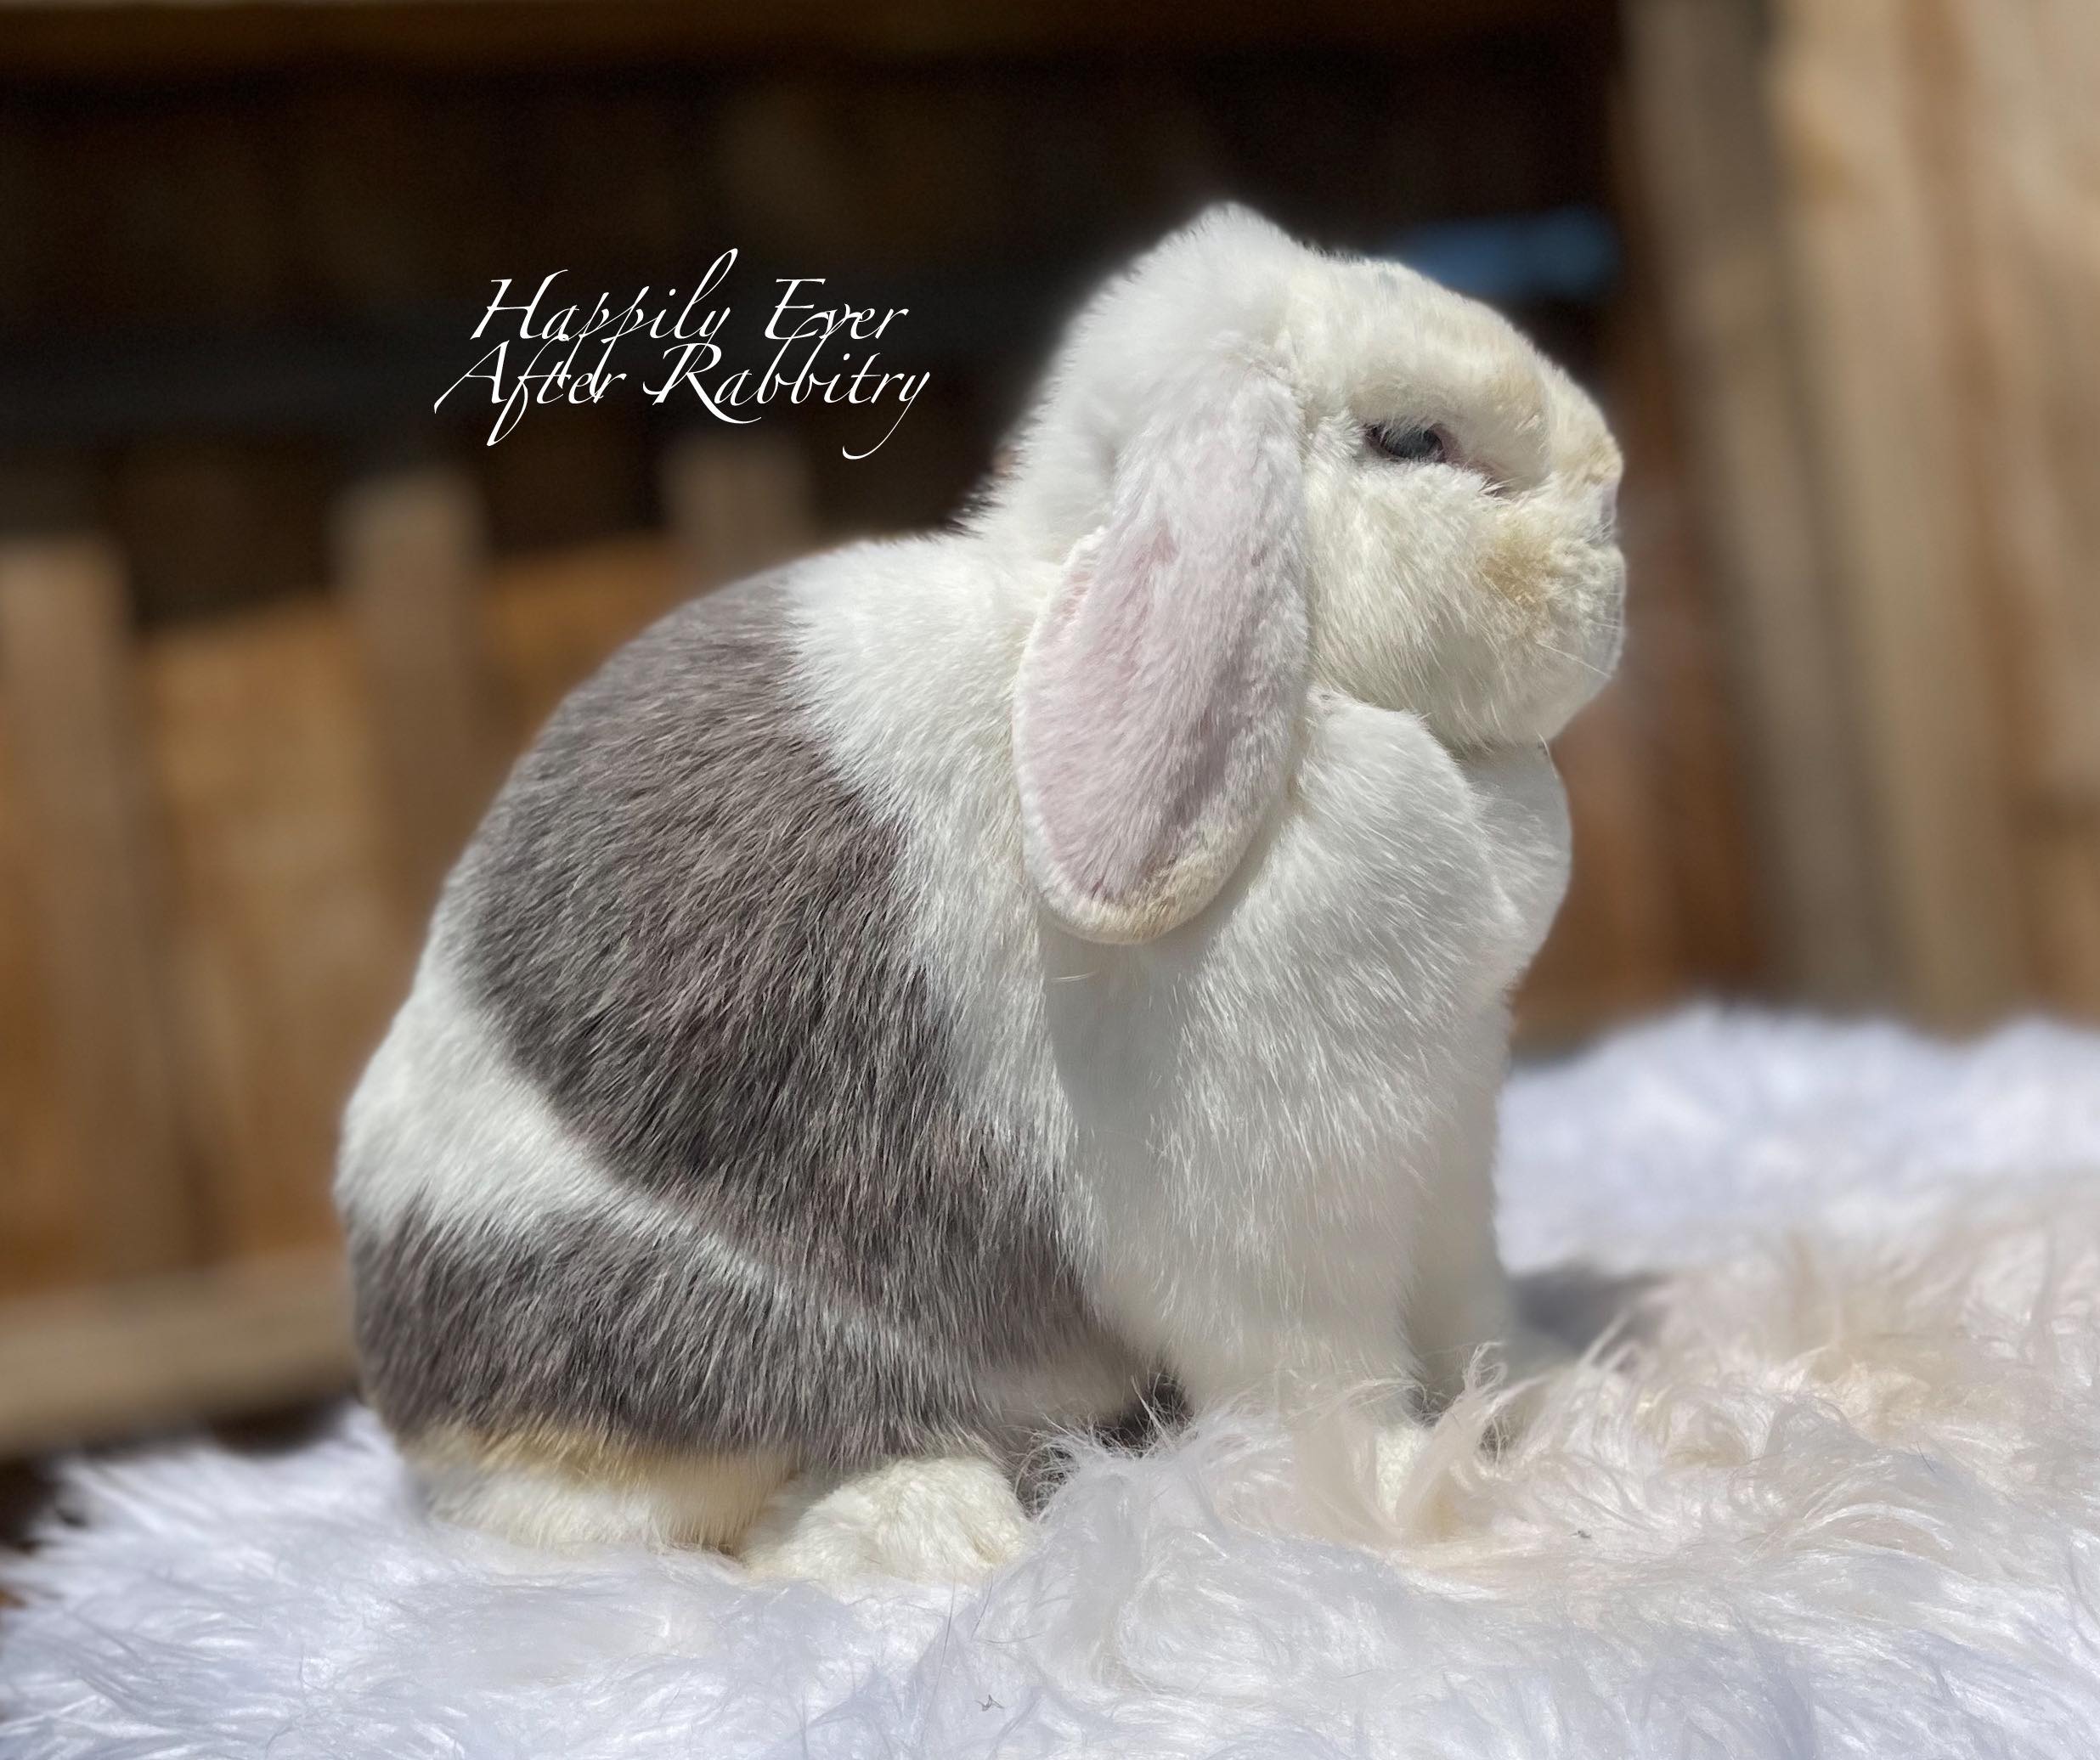 Hop into Happiness: Rabbits for Sale, Your New Companion Awaits